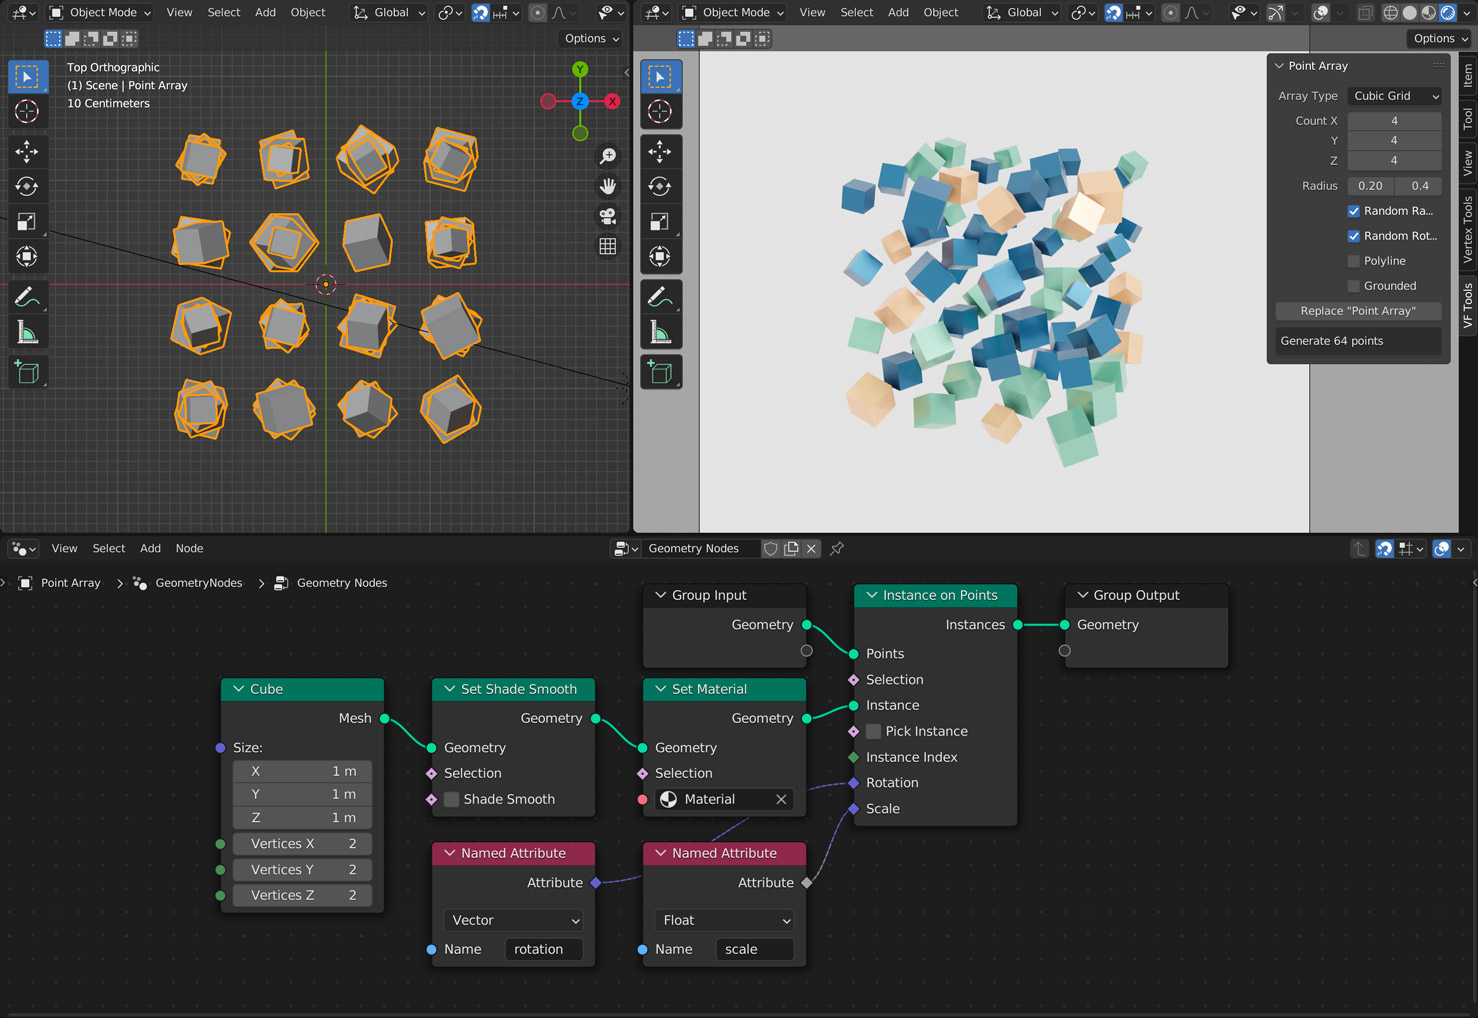 screenshot of the add-on interface in Blender showing the cubic grid options and sample geometry nodes setup